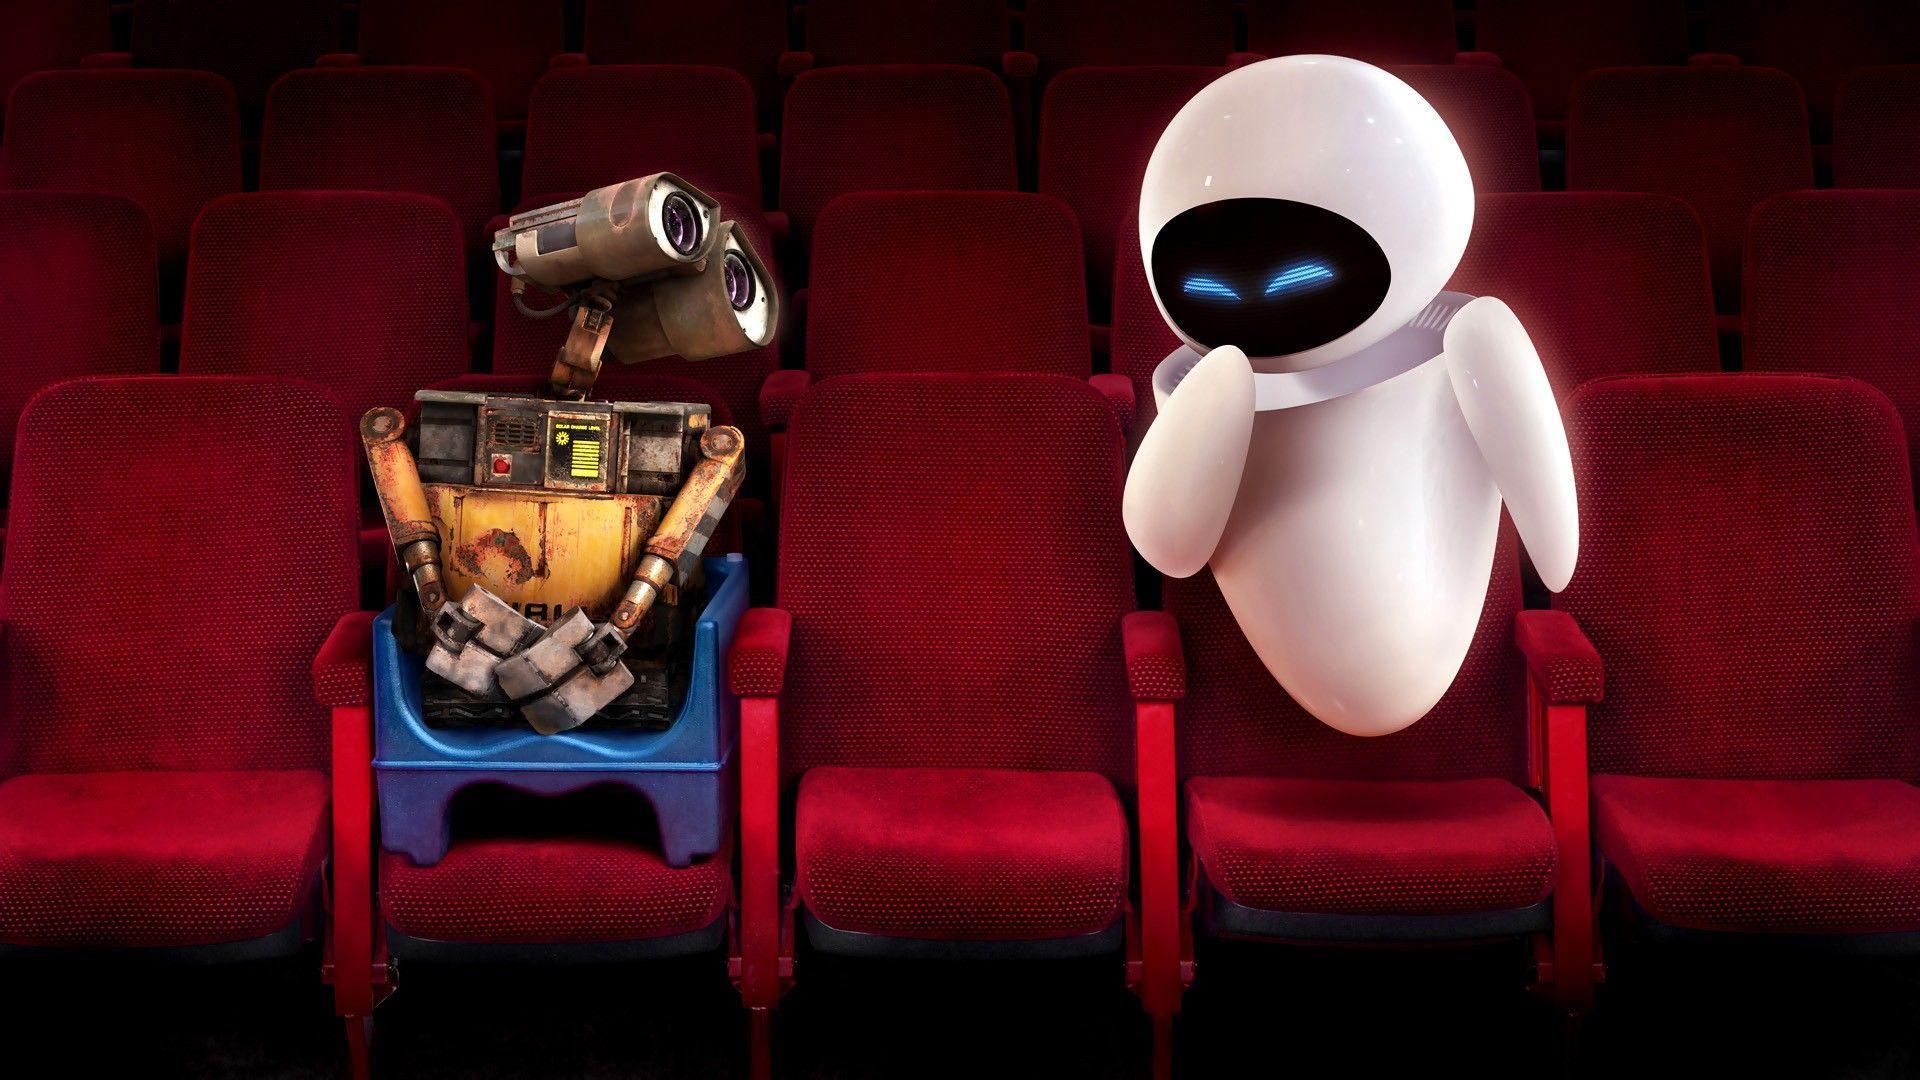 Wall E And Eve At The Cinema Widescreen Wallpaper. Wide Wallpaper.NET